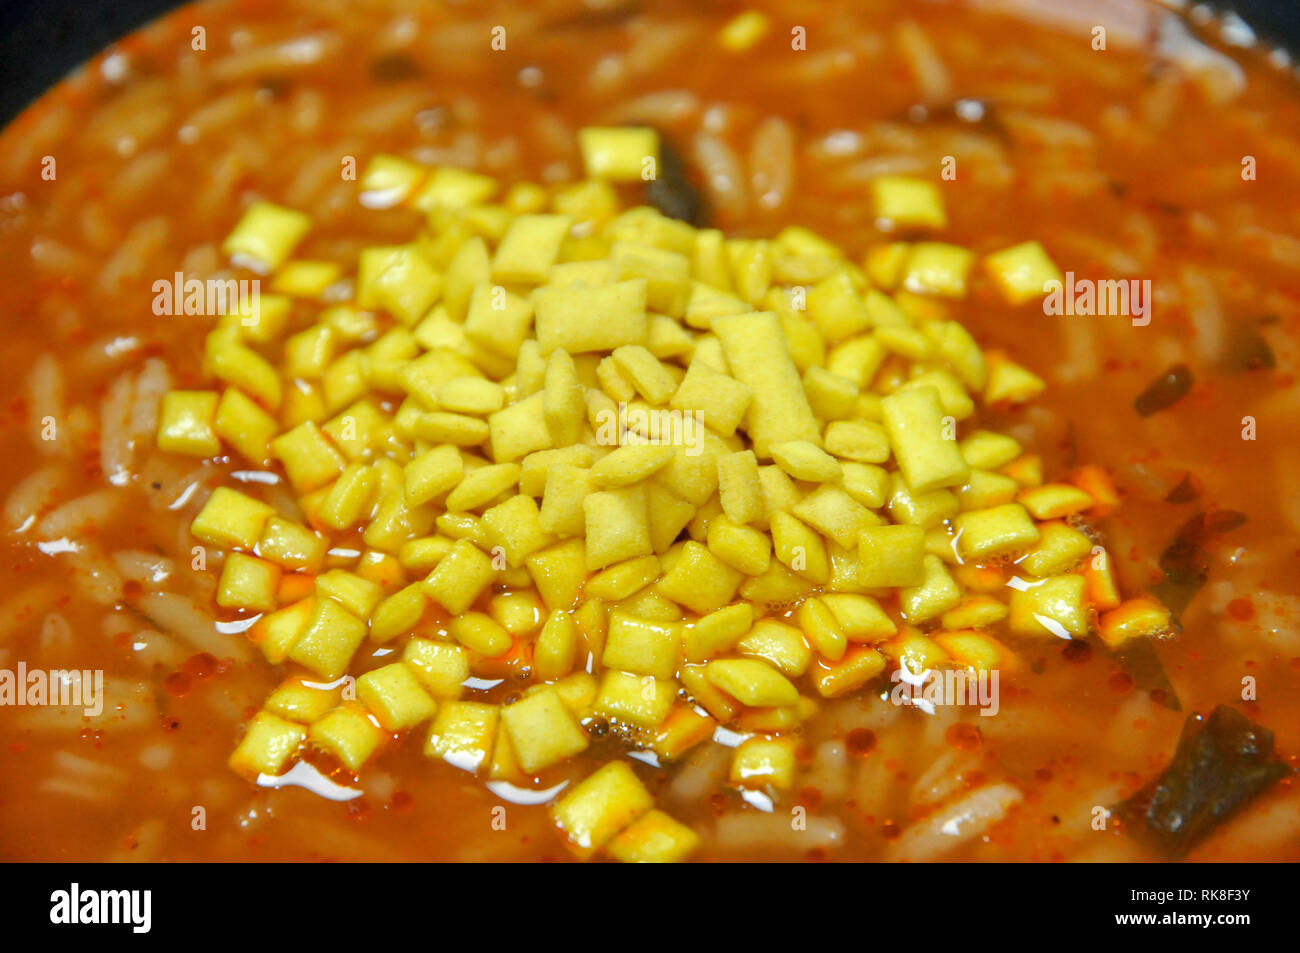 Tomato soup with Soup Almonds AKA soup mandel an Israeli food product consisting of crisp mini croutons that are added to soup at the table Stock Photo